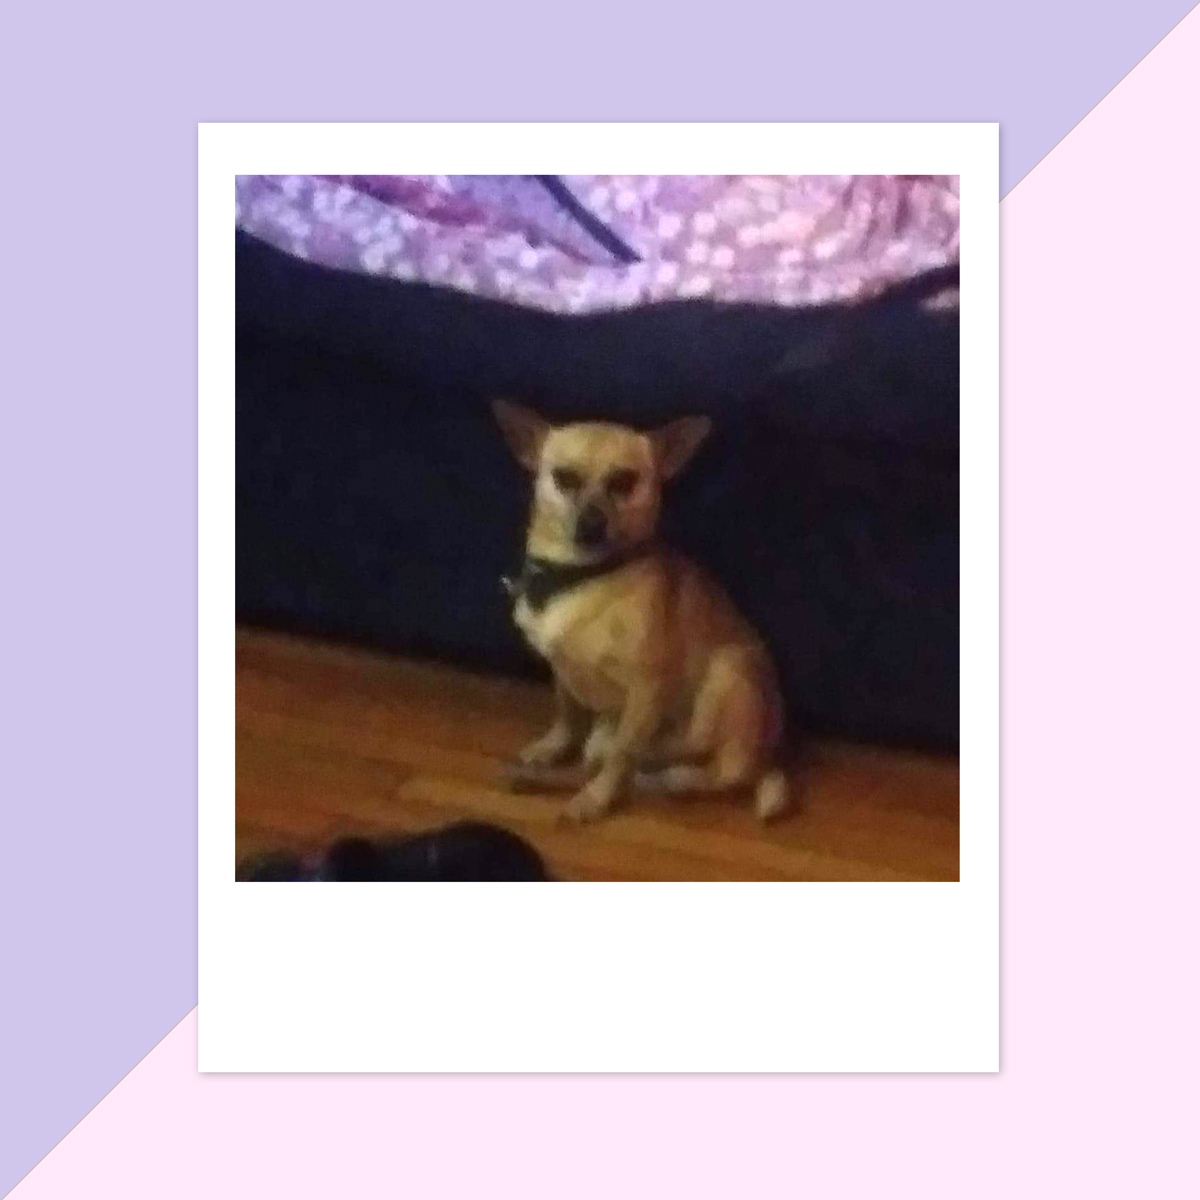 Debra a In san antonio sent a picture of her furry and funny friend max Max is a pure chihuahua and he is years old